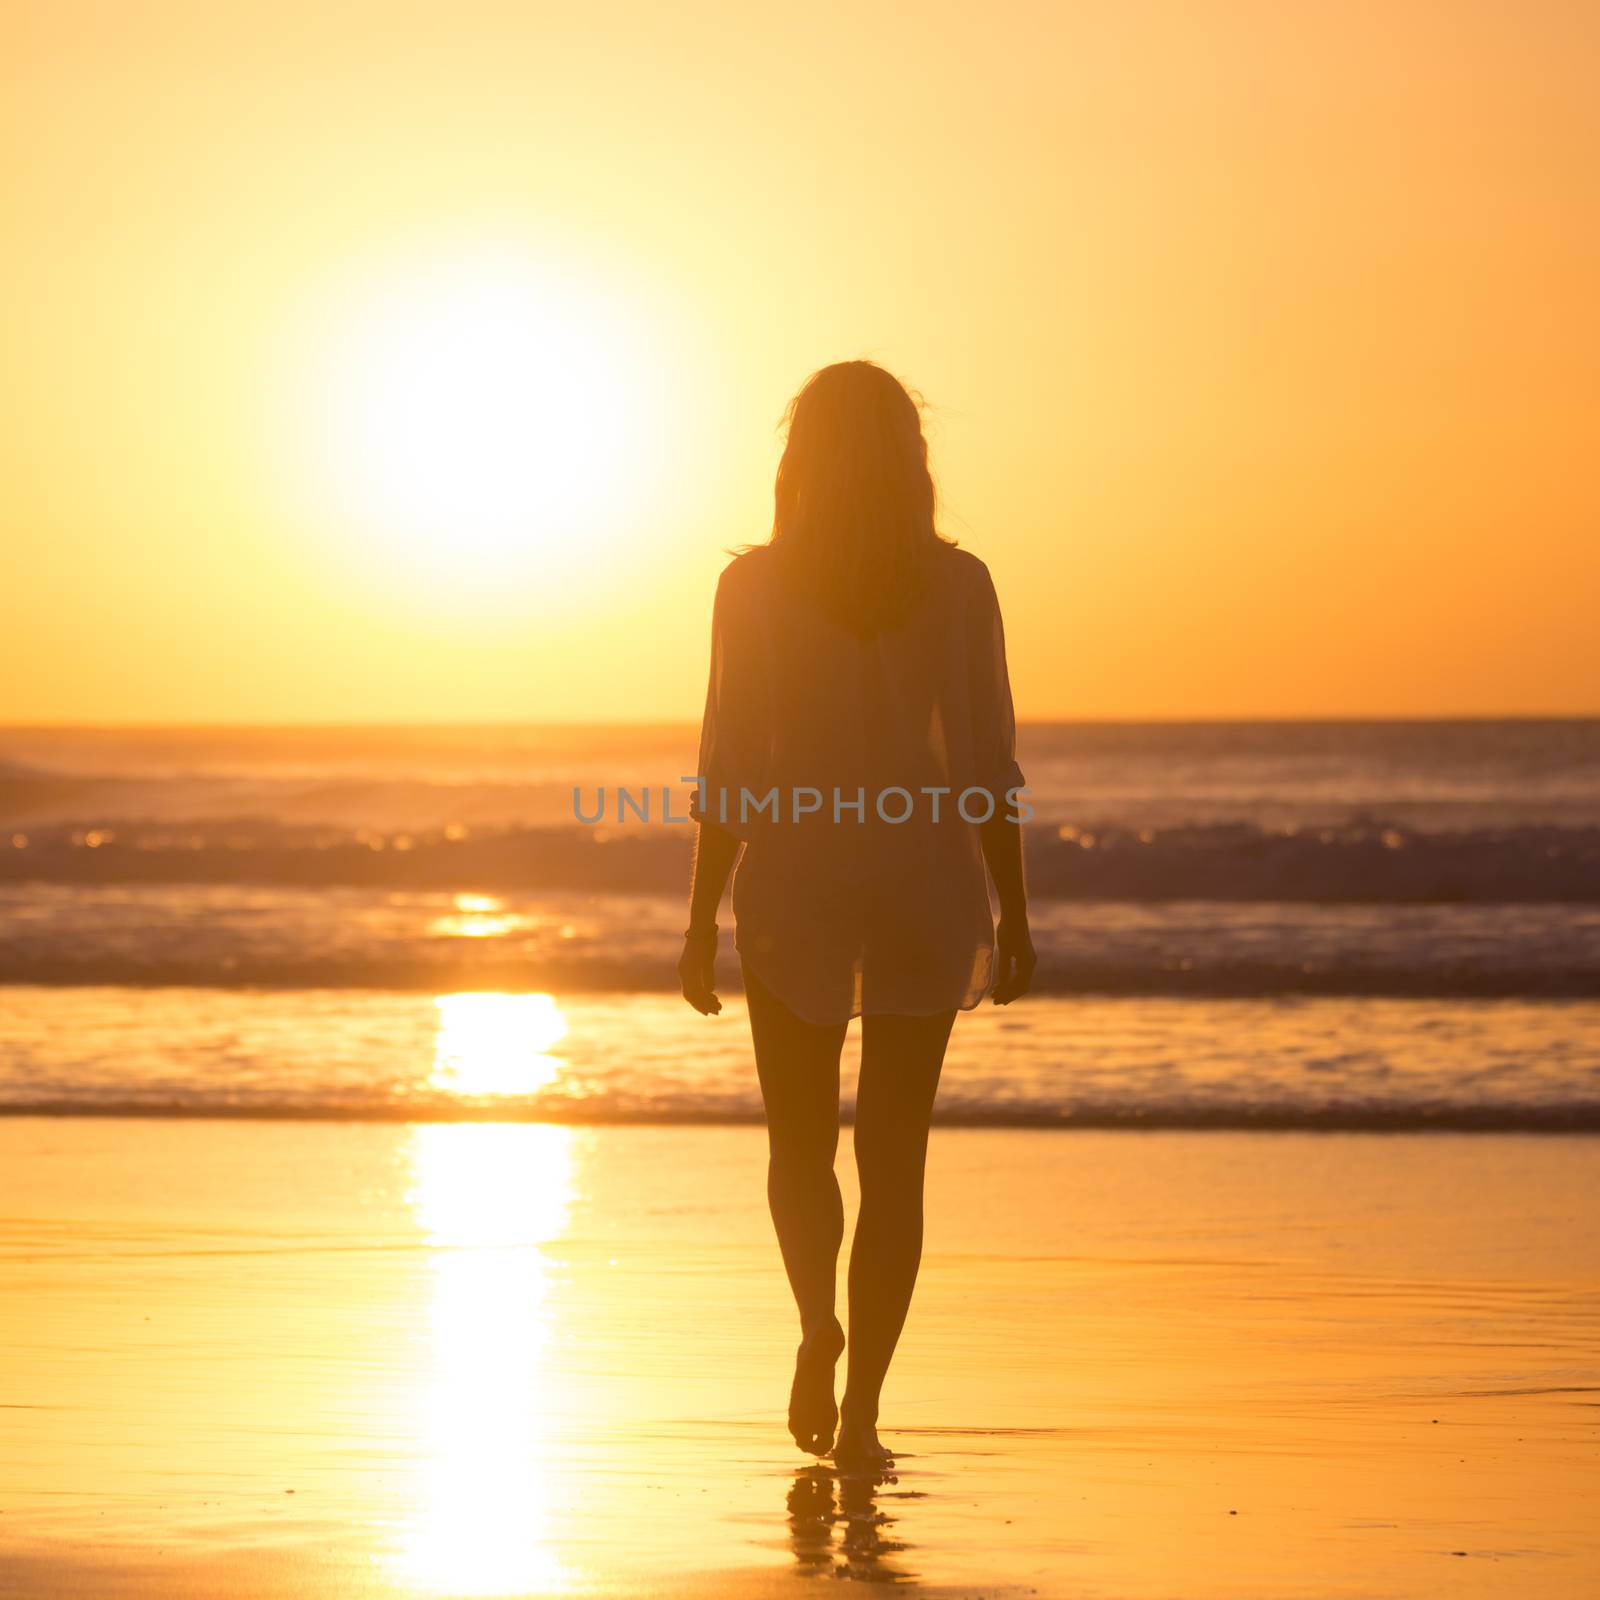 Woman walking on sandy beach in sunset leaving footprints in the sand. Beach, travel, concept. Copy space. Vertical composition.